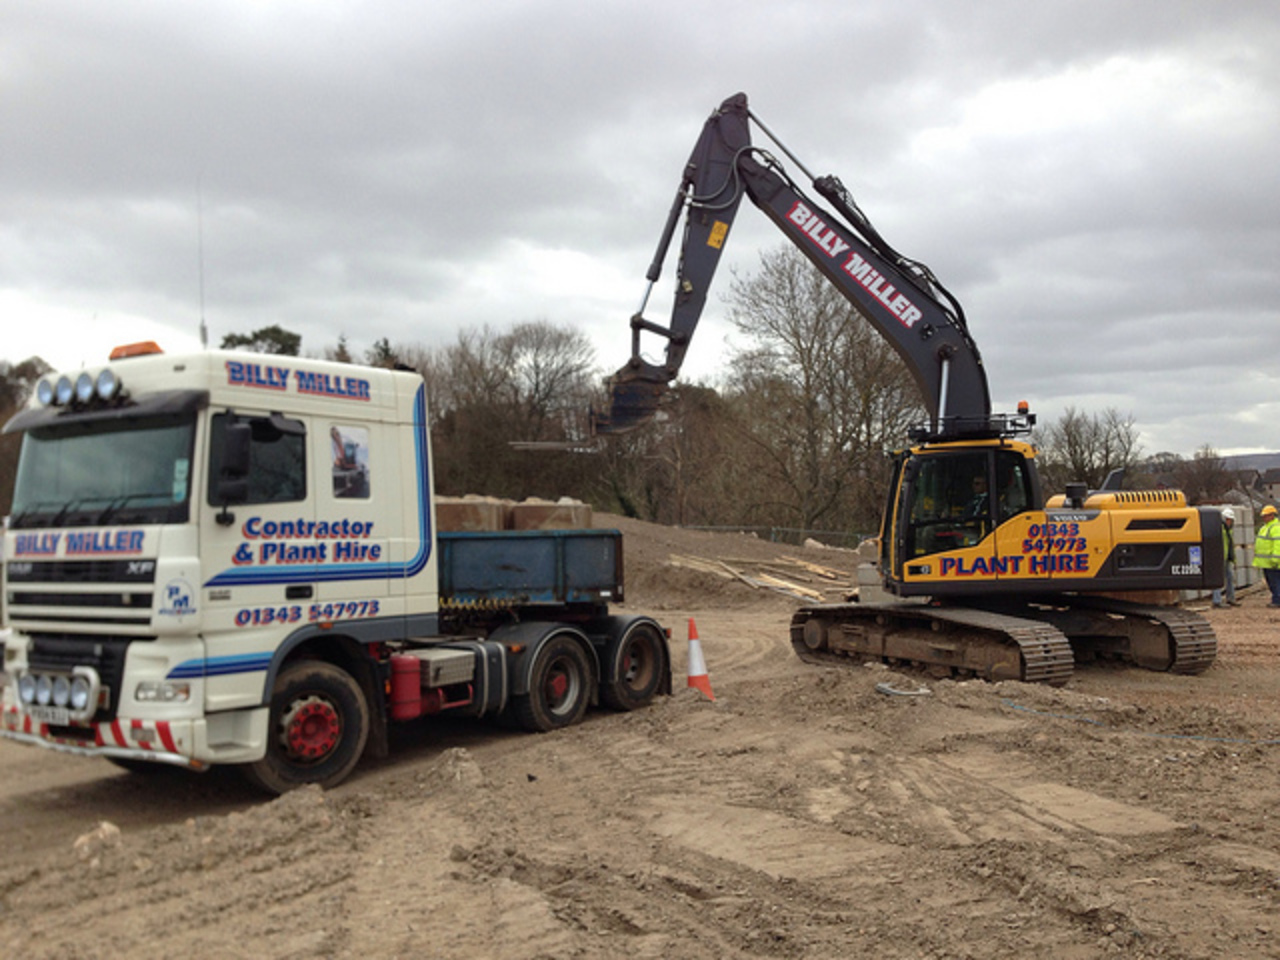 Flickr: The billy miller contractor and plant hire Pool